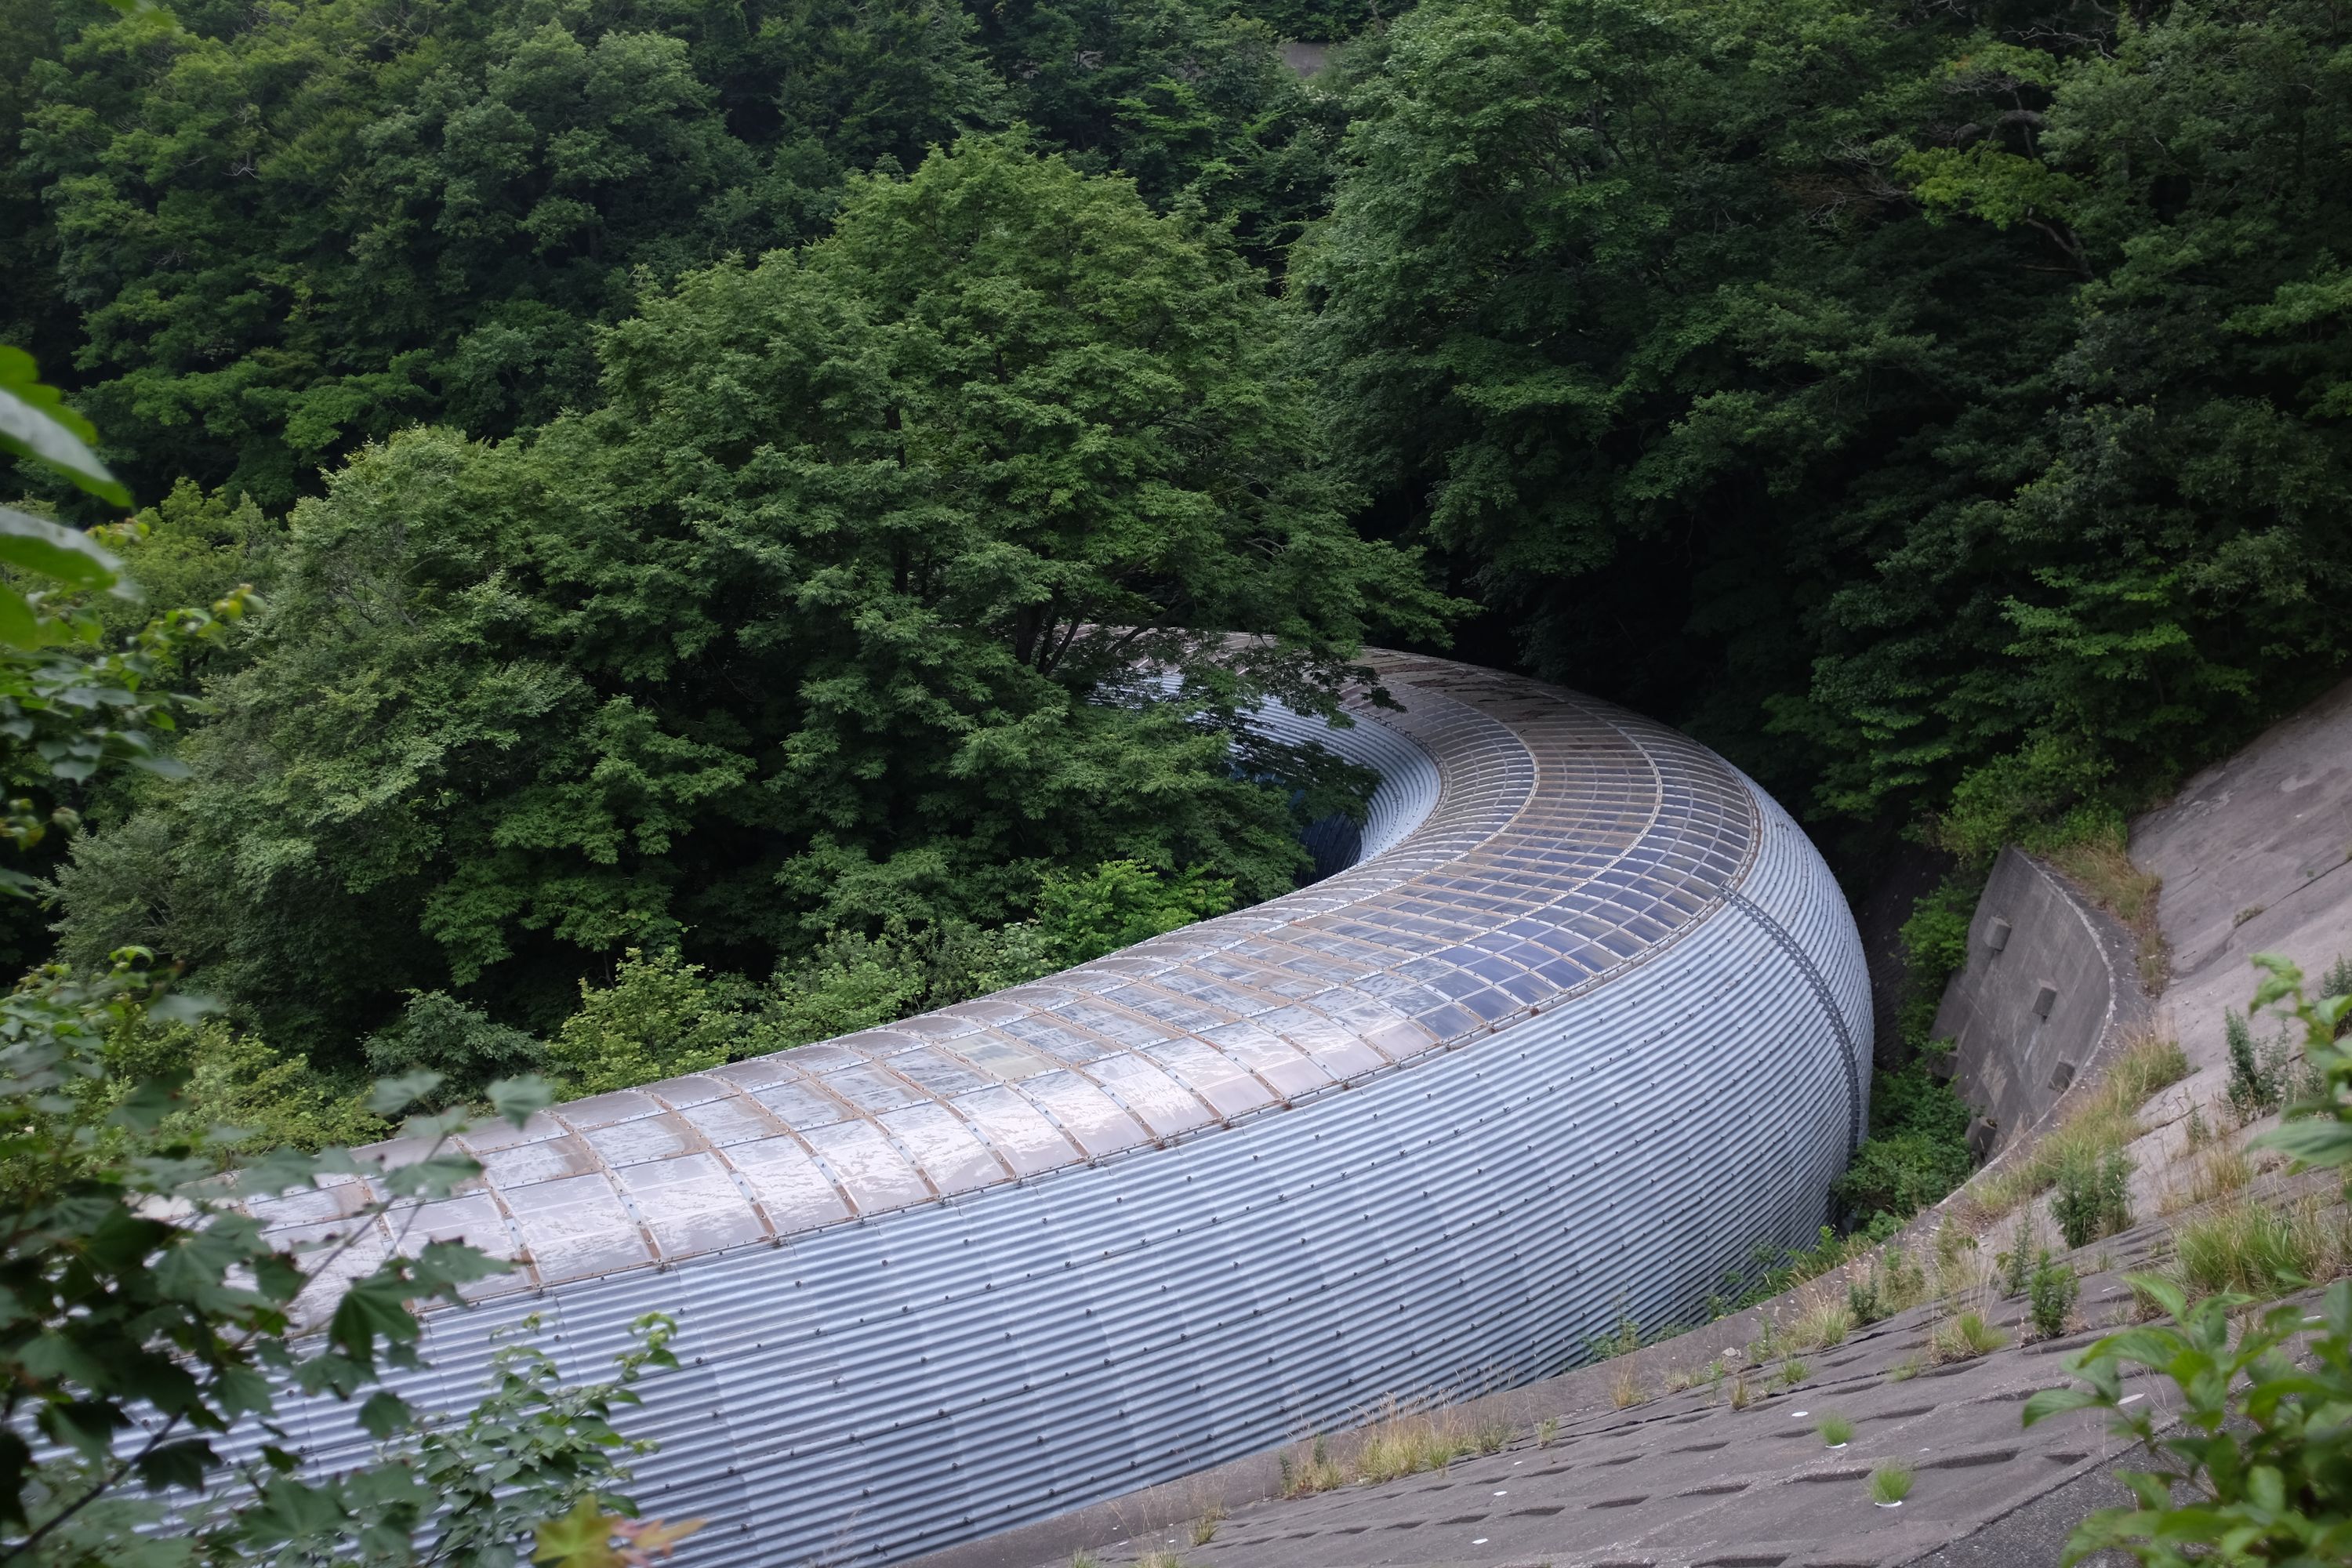 Looking down on the same tunnel from above. It looks like a large, metallic tube.